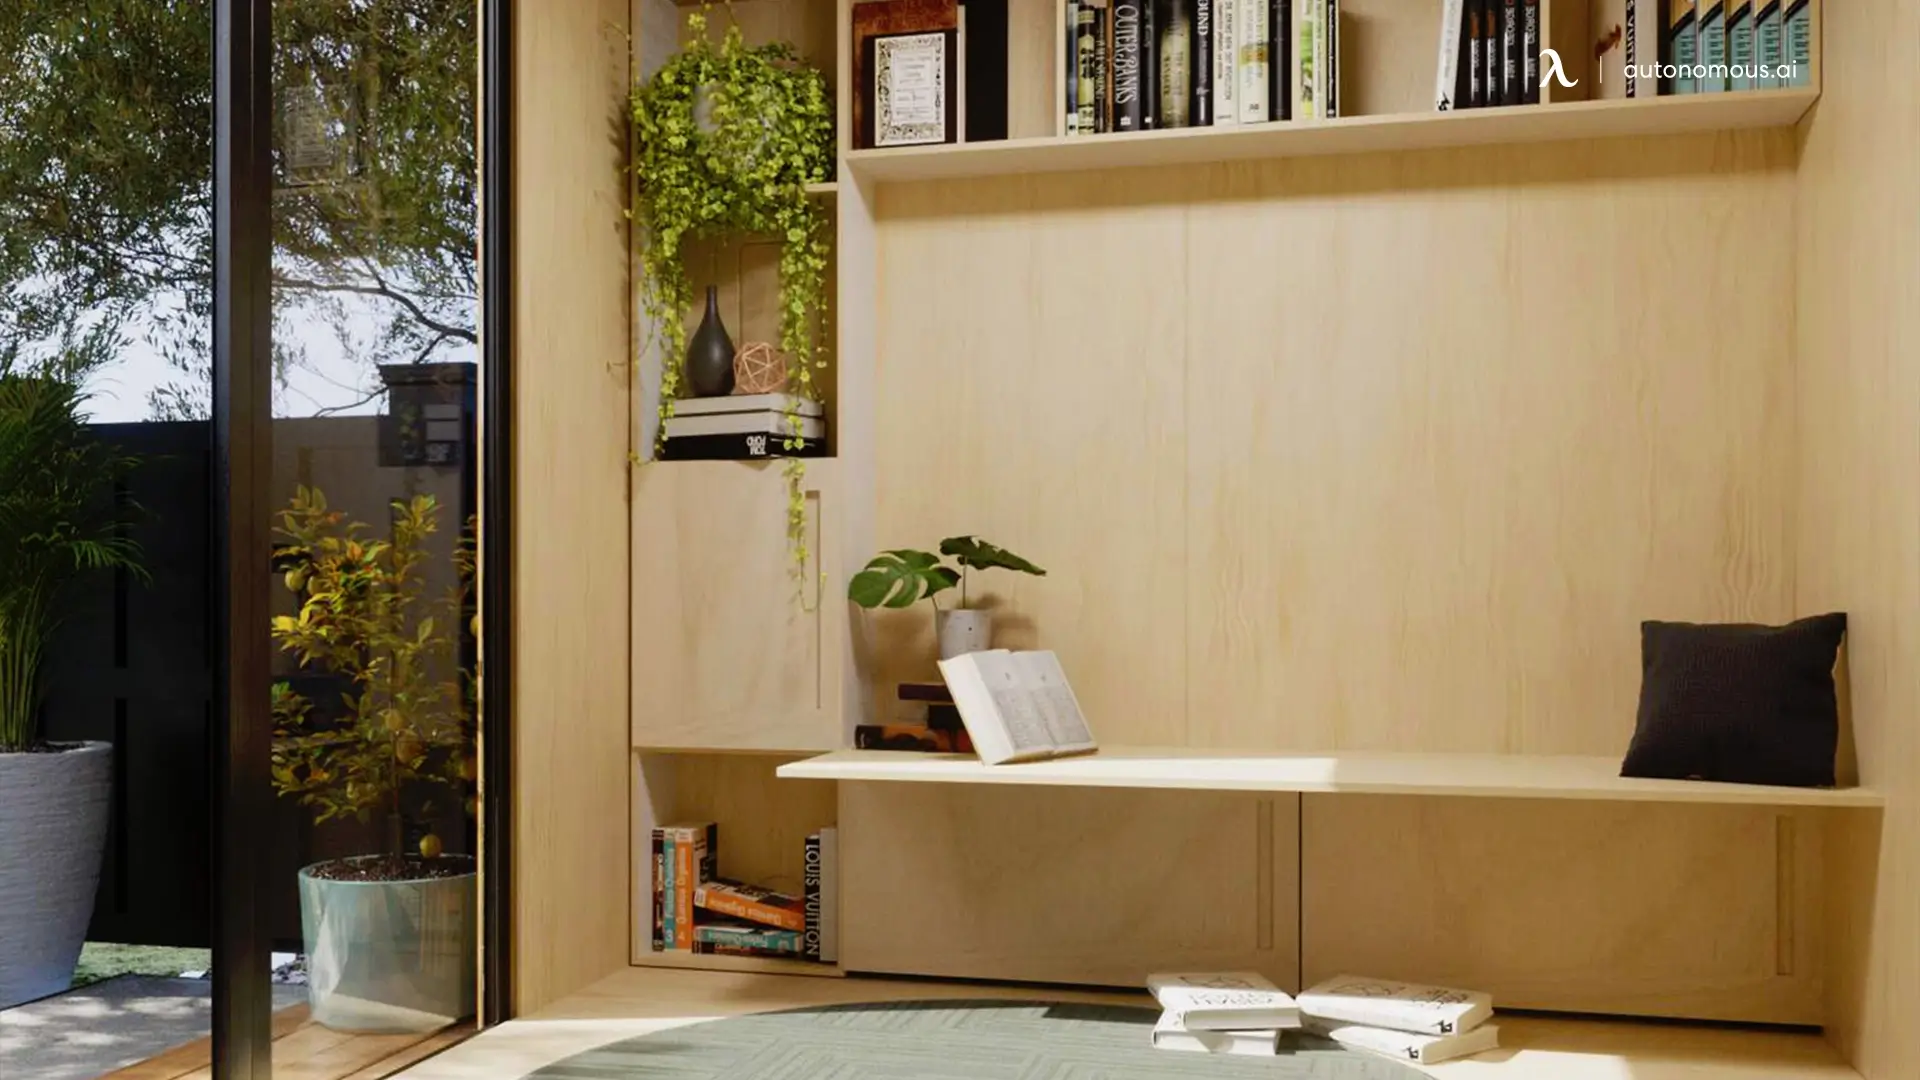 small library into your home office guest room.